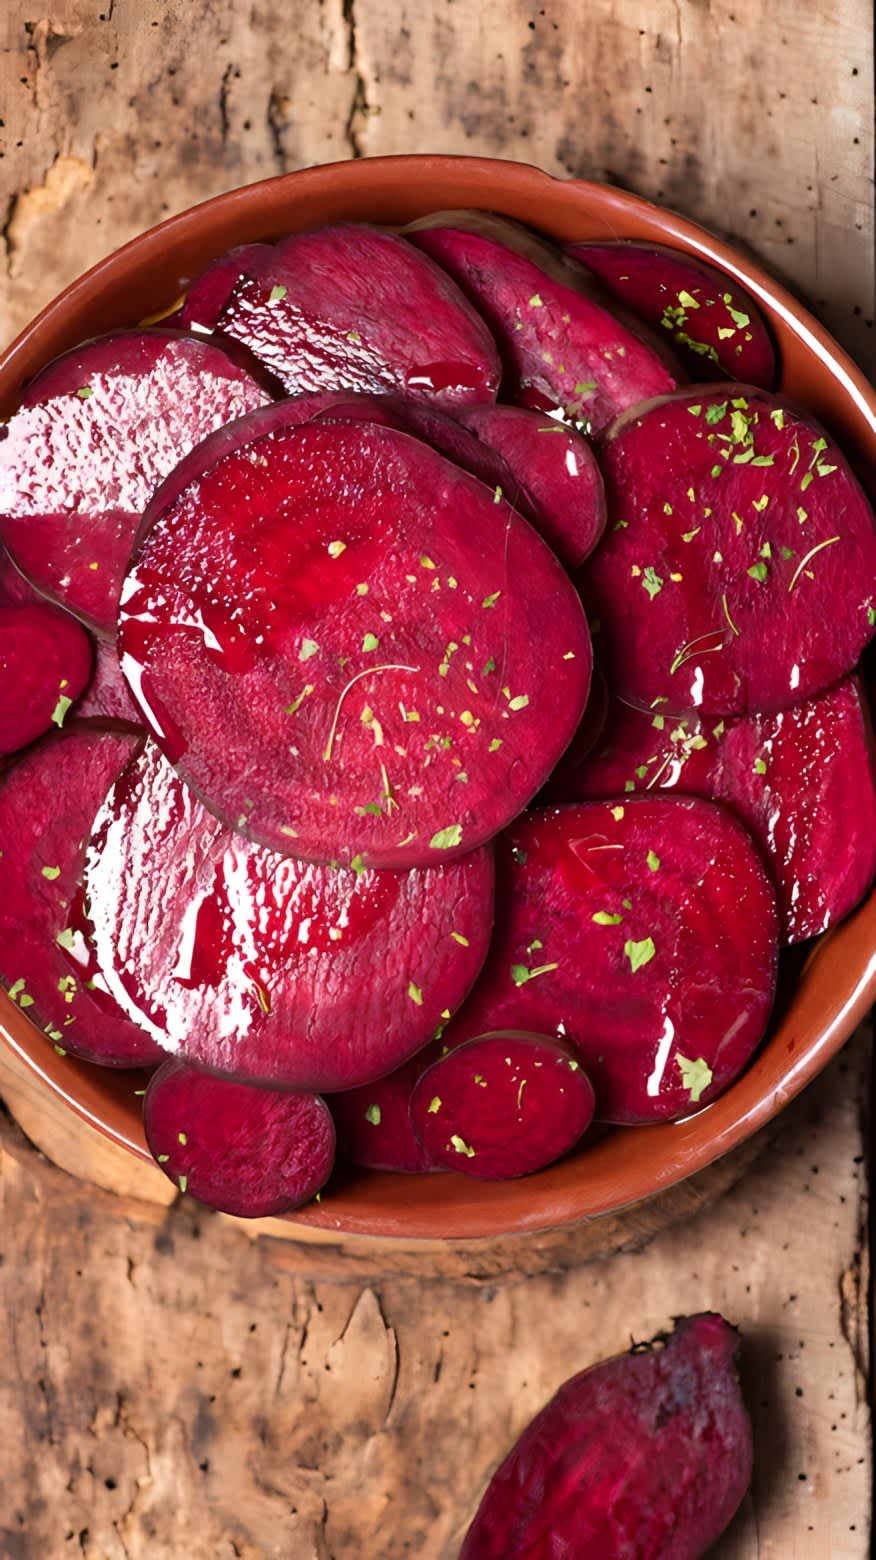 Sliced cooked beets in a wooden bowl